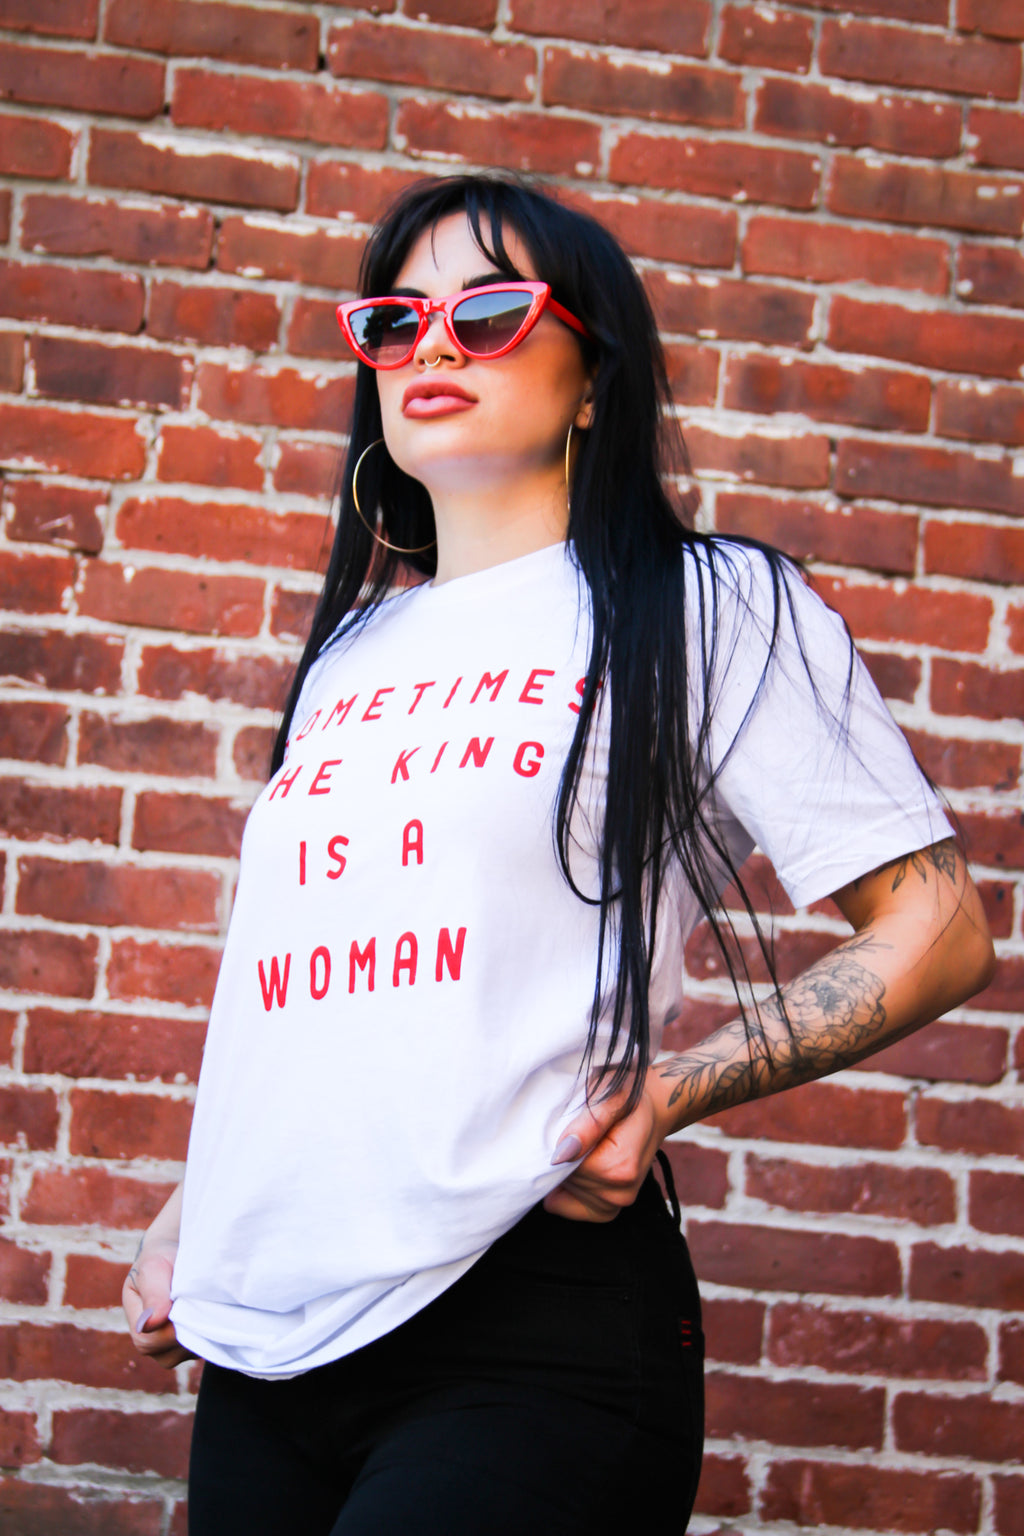 Bey "The King Is A Woman" Tee